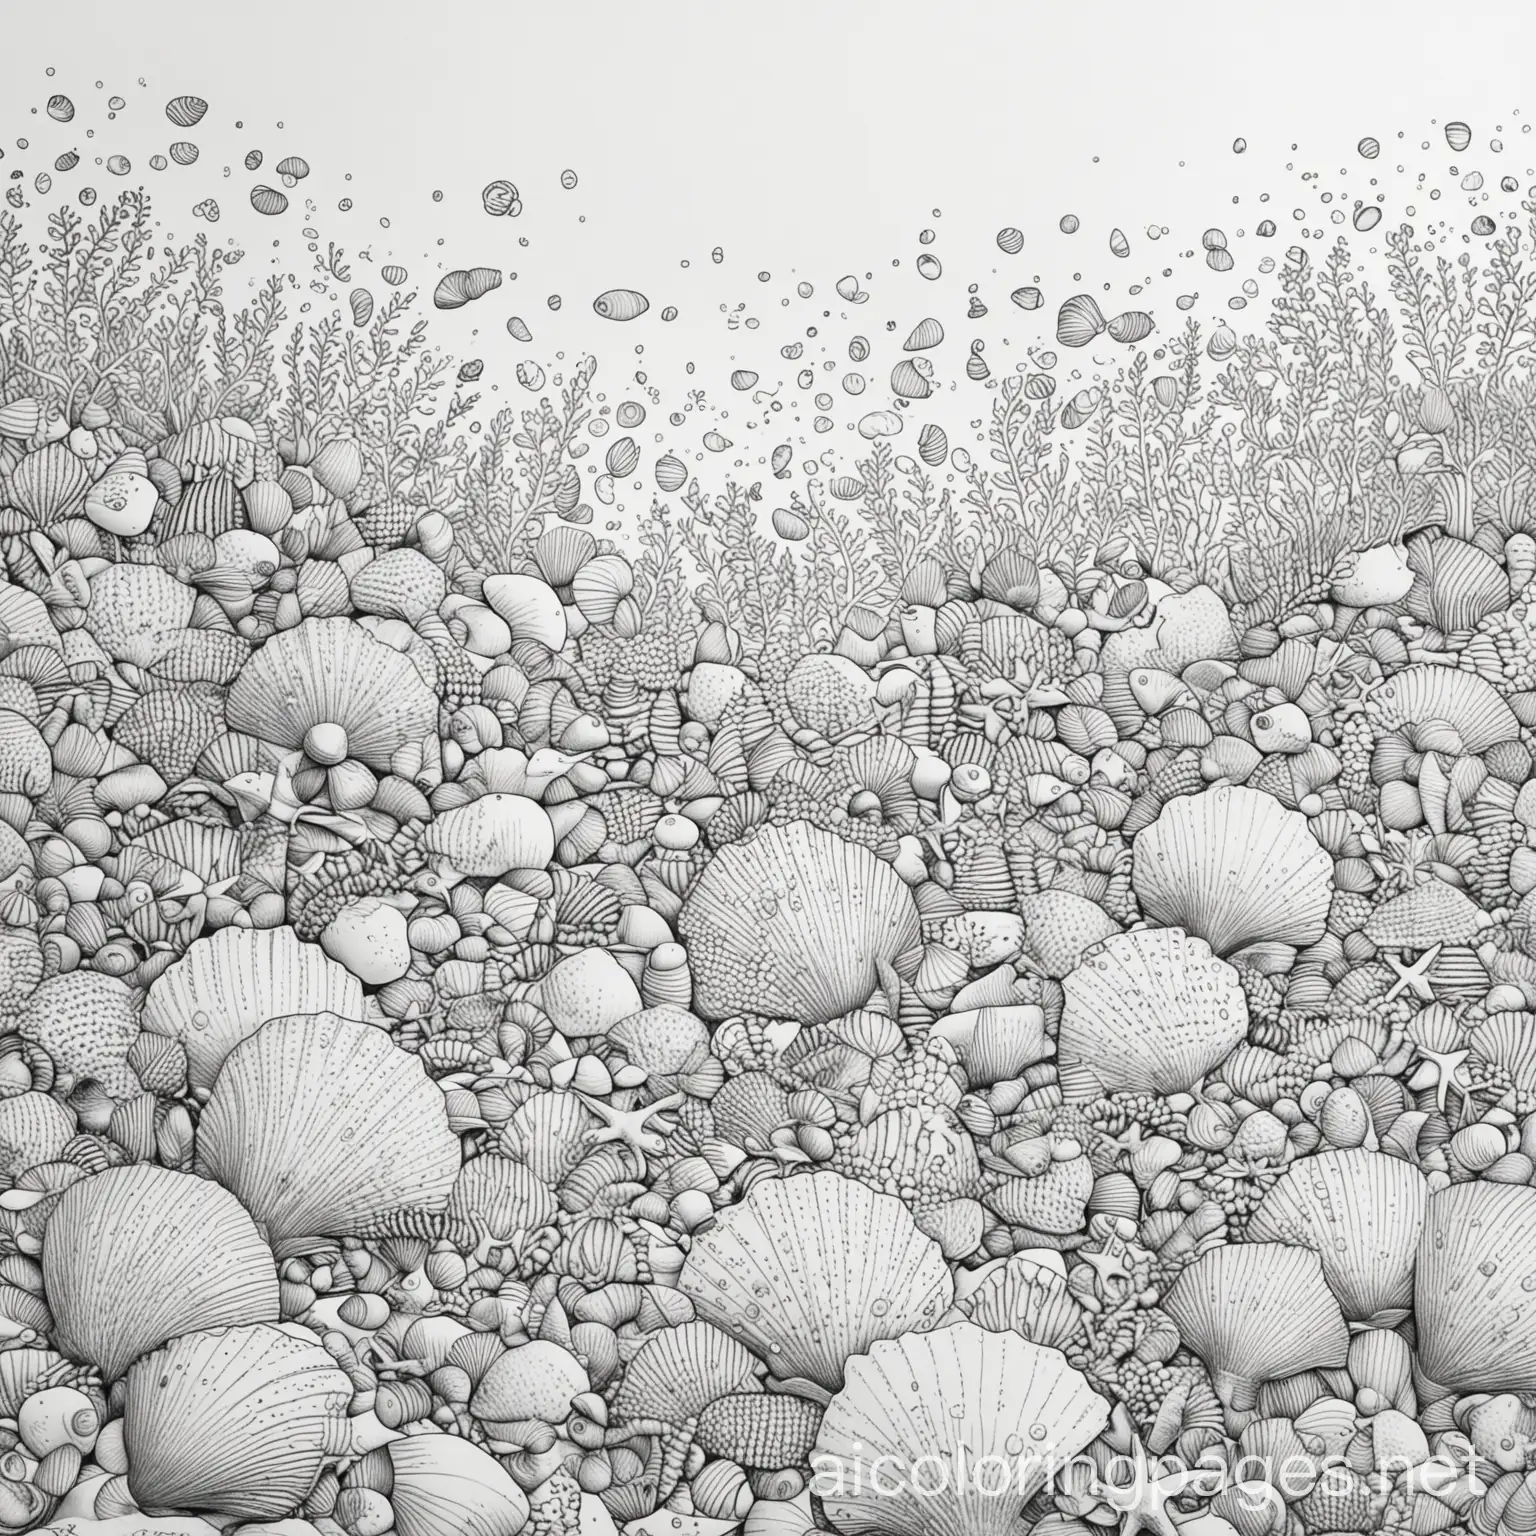 Under-the-Sea-Coloring-Page-with-Shells-Black-and-White-Line-Art